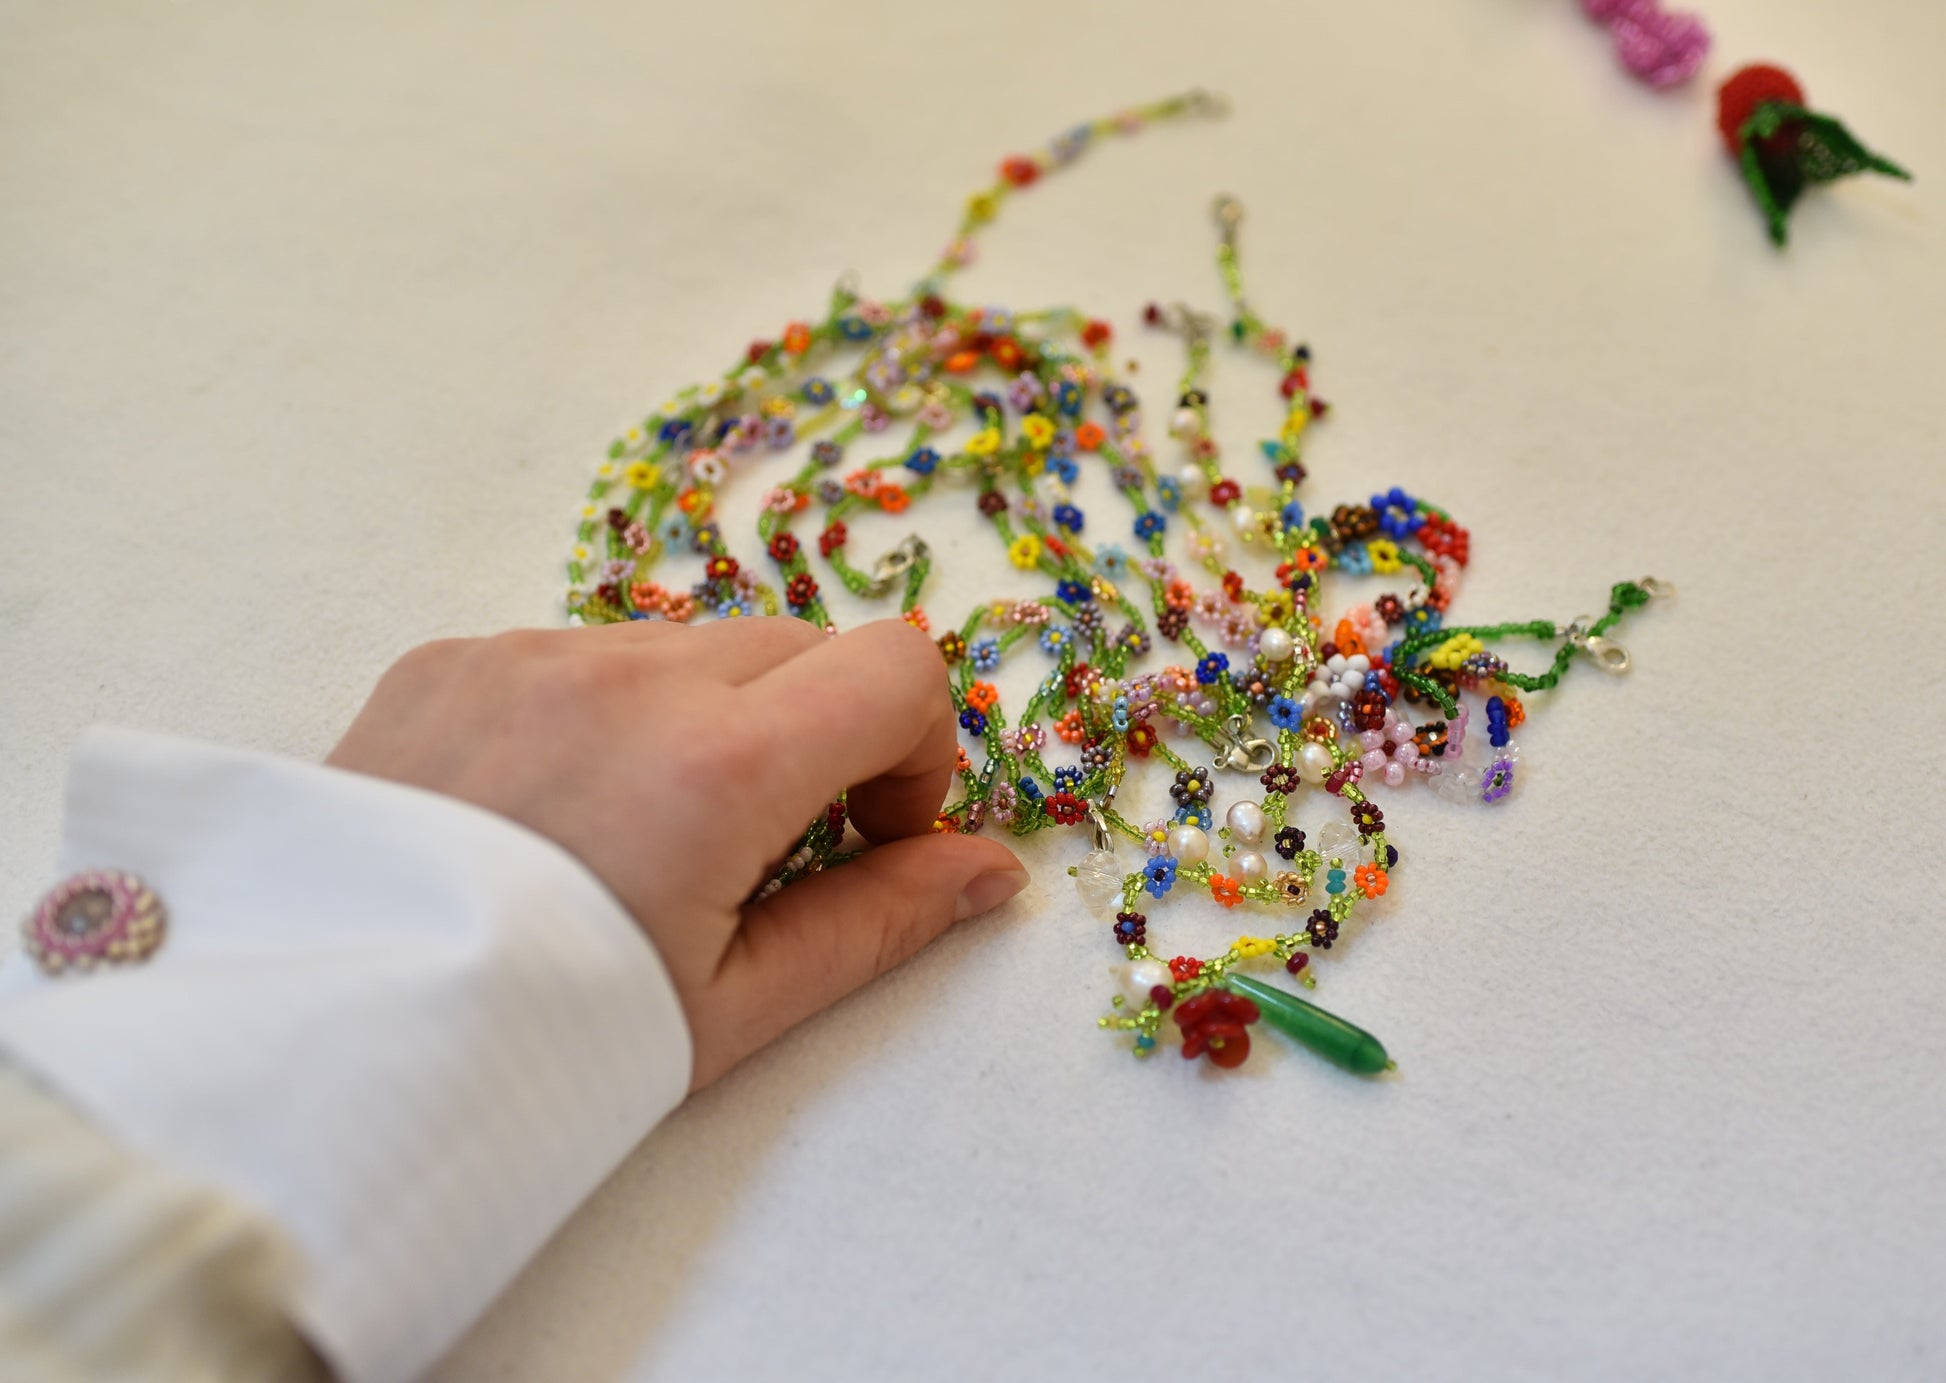 Jewelry Workshop "Fine Beaded Flowers" with Roxanei in Craiova, Rumania by subcultours